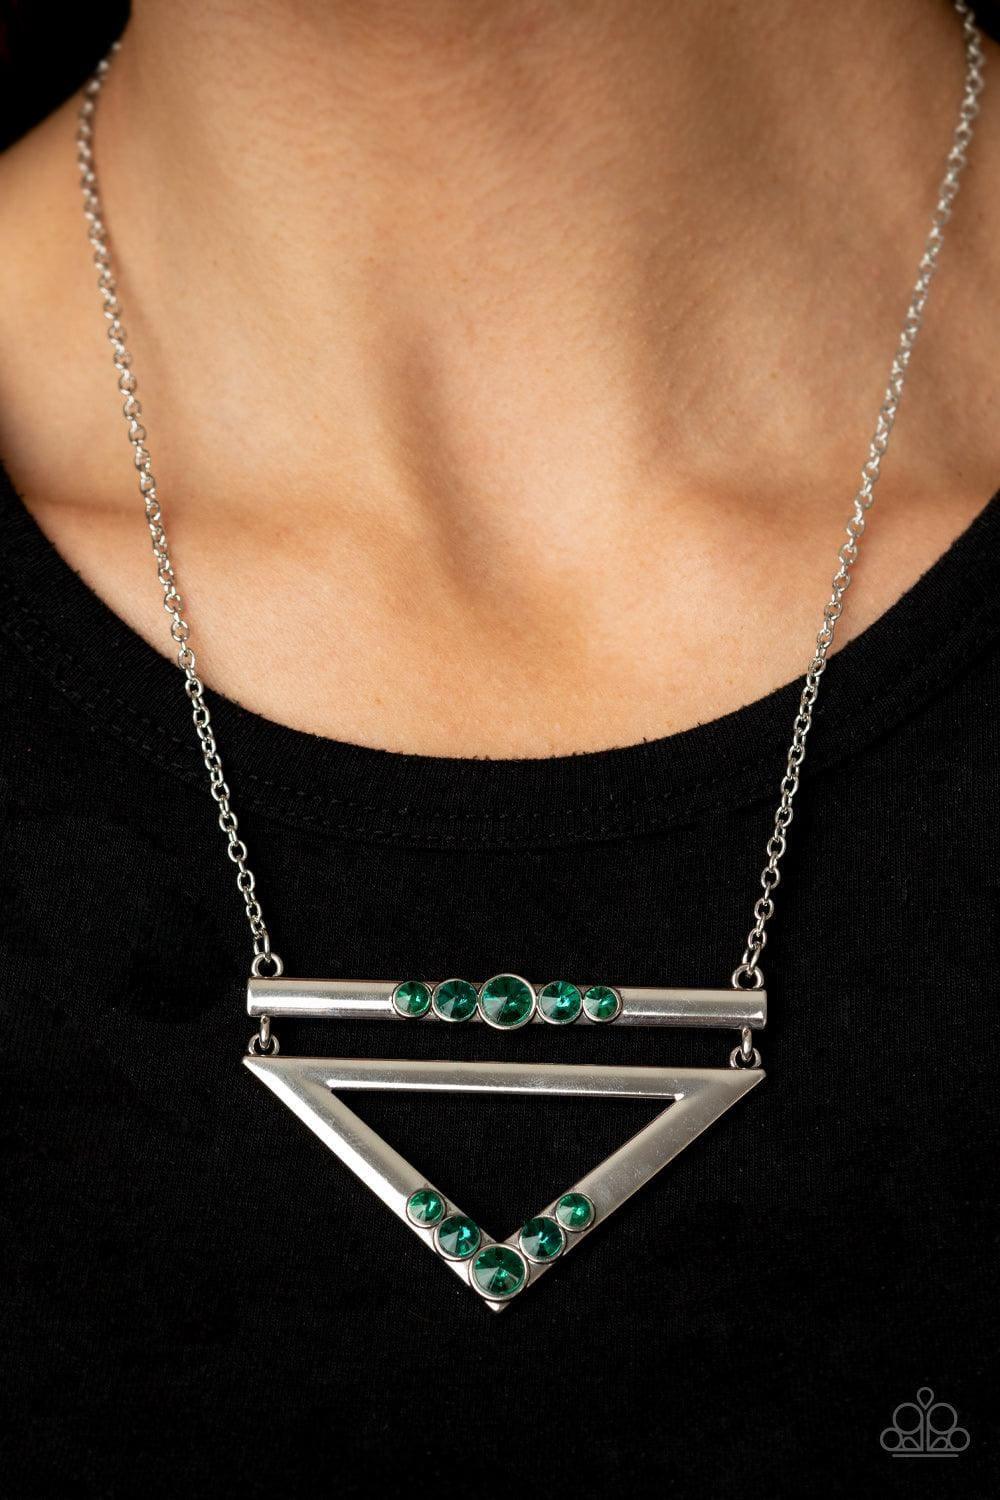 Paparazzi Accessories - Triangulated Twinkle - Green Necklace - Bling by JessieK